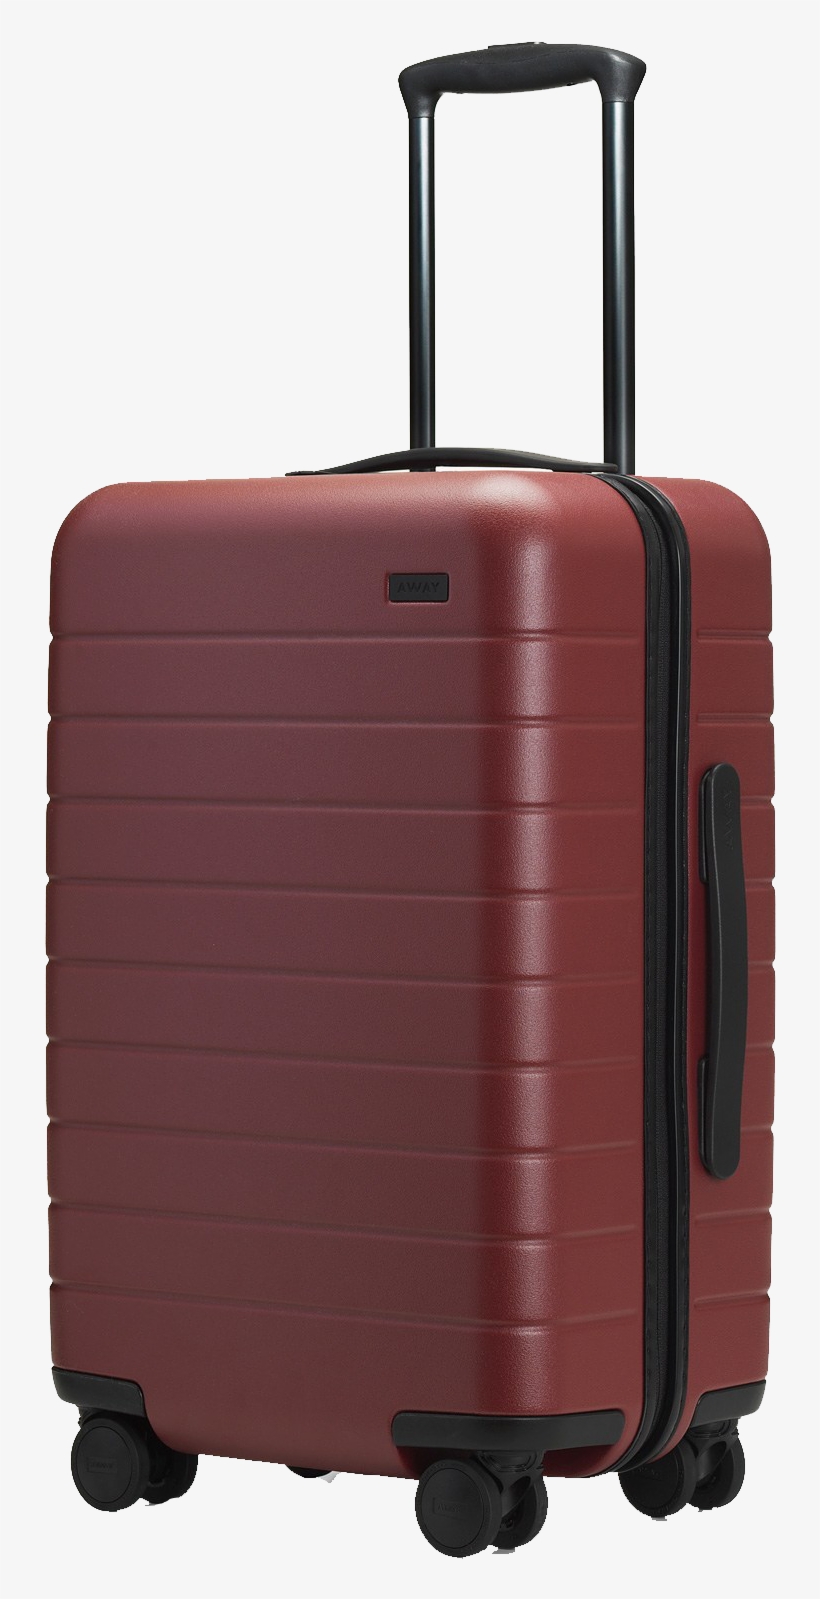 Suitcase Photo Background - Away Carry On Brick, transparent png #7613163